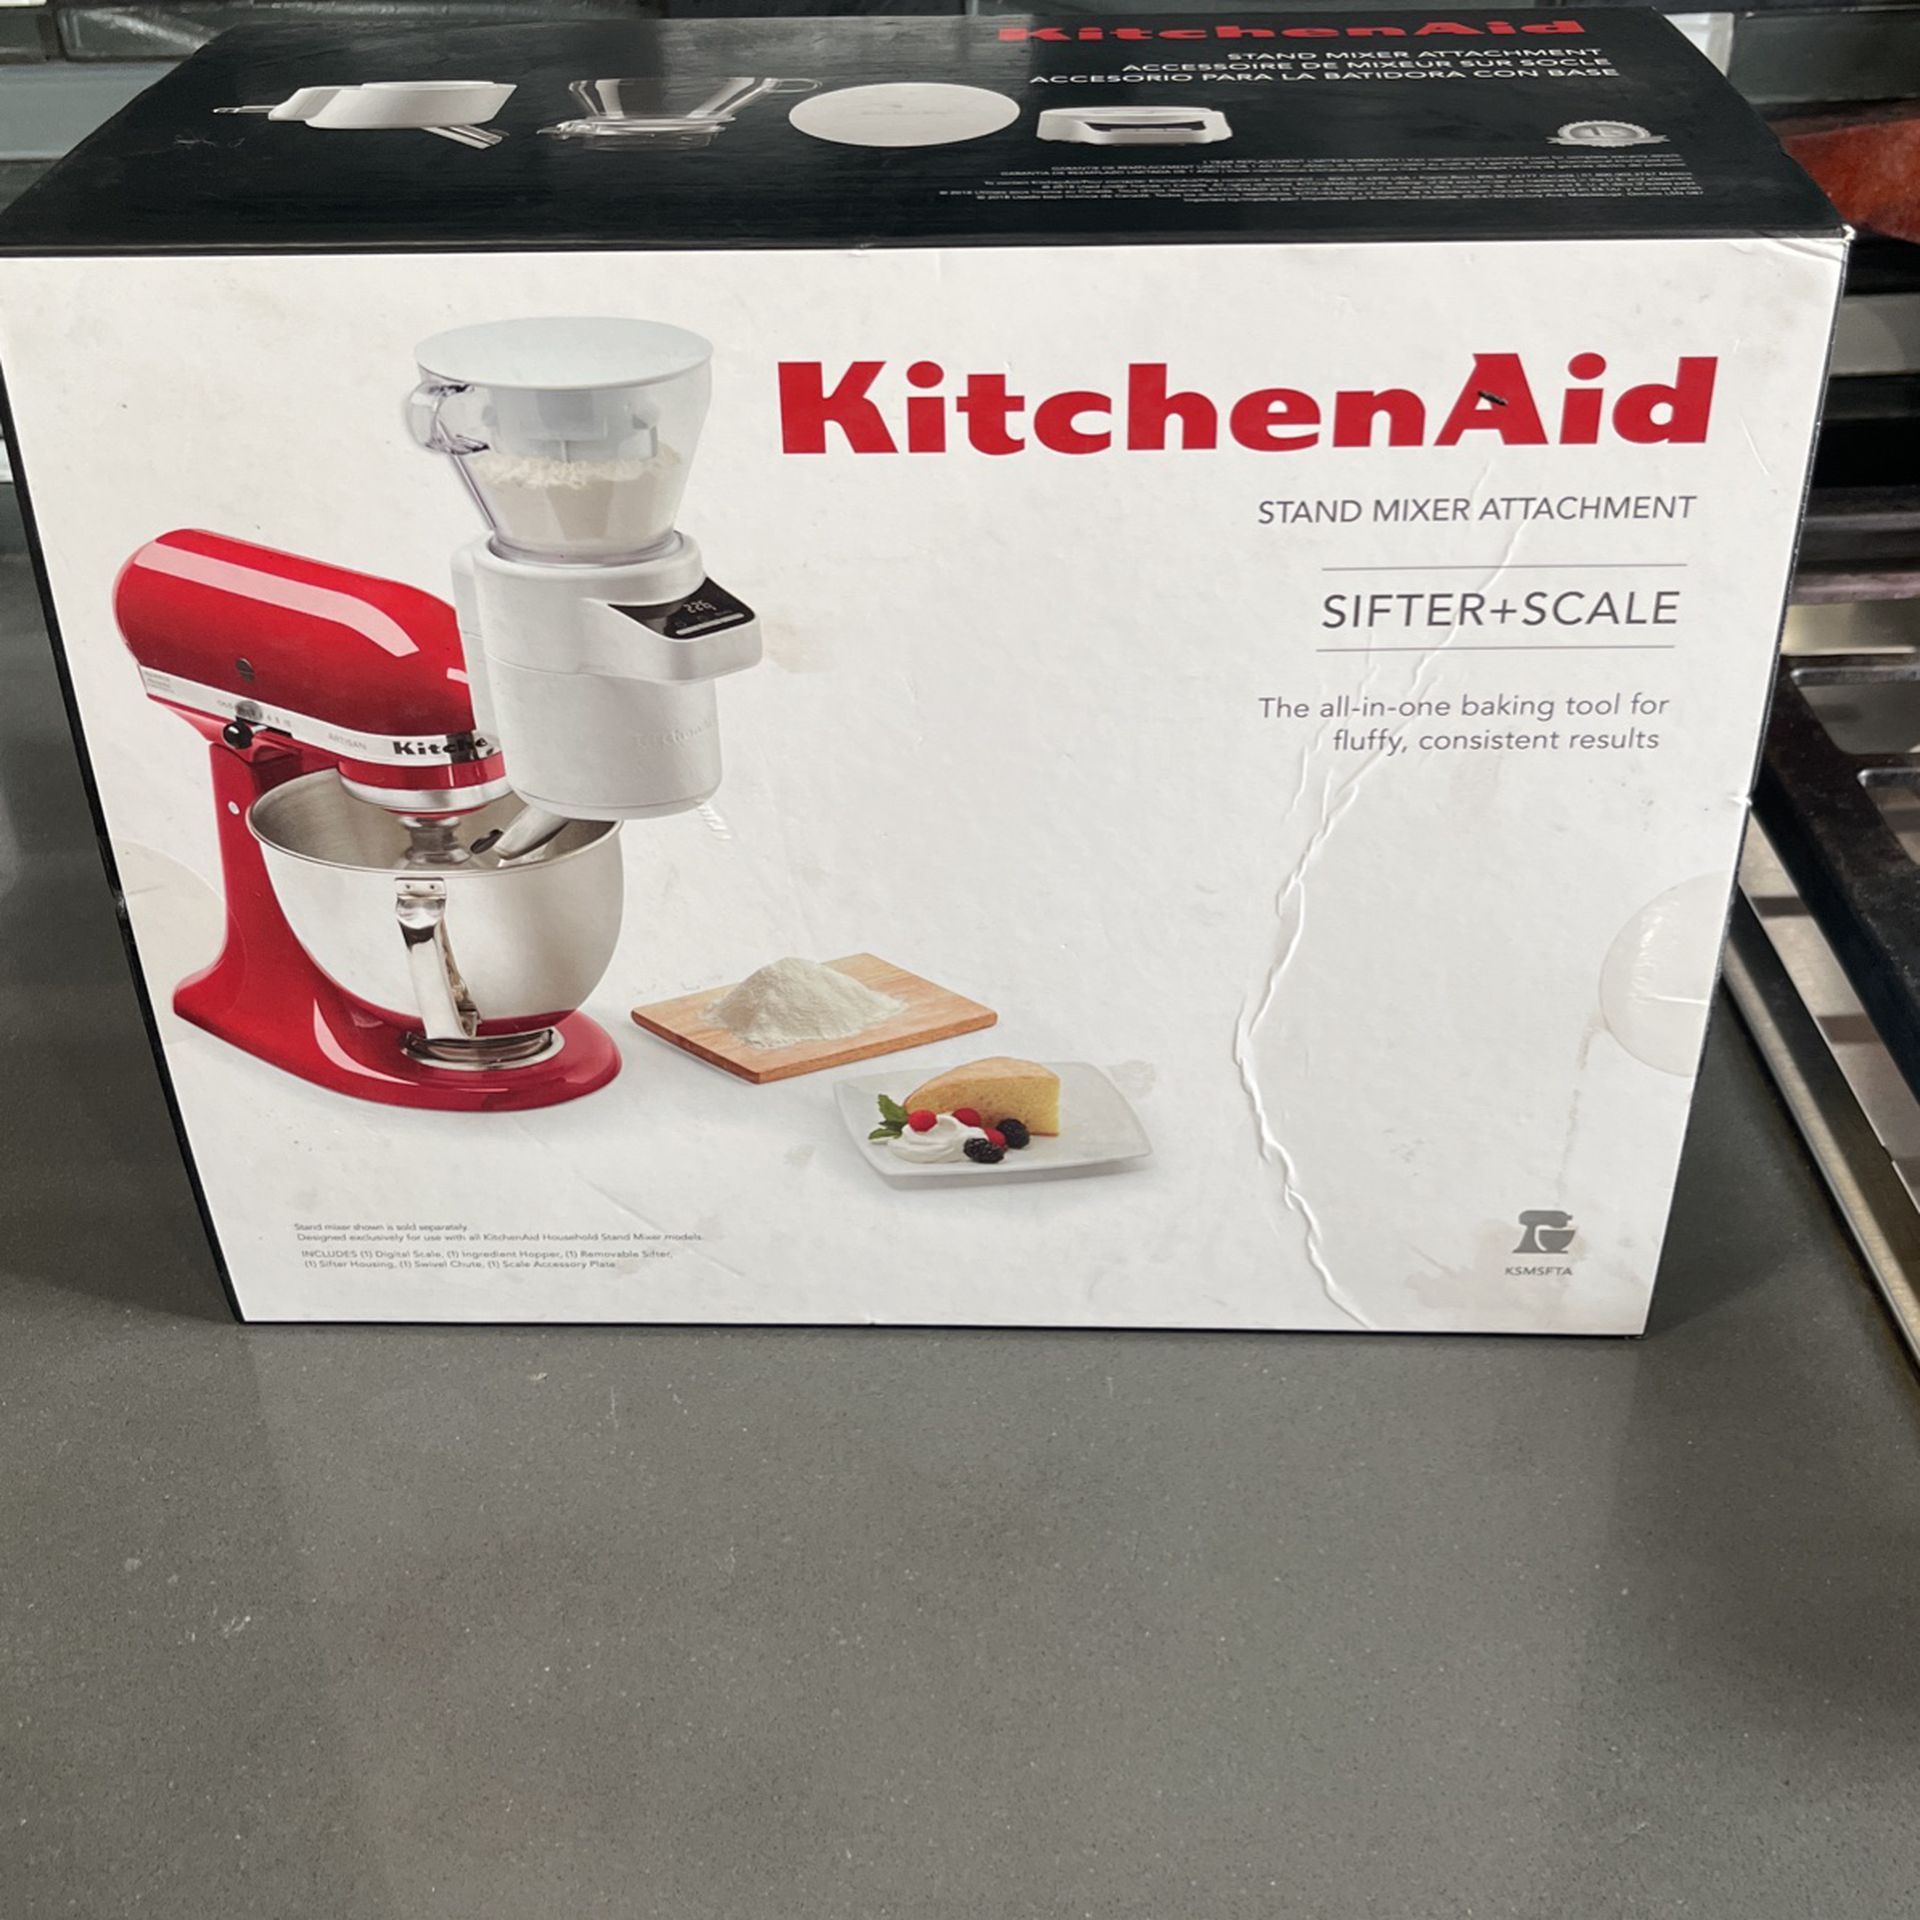 Kitchen Aid Sifter+Scale